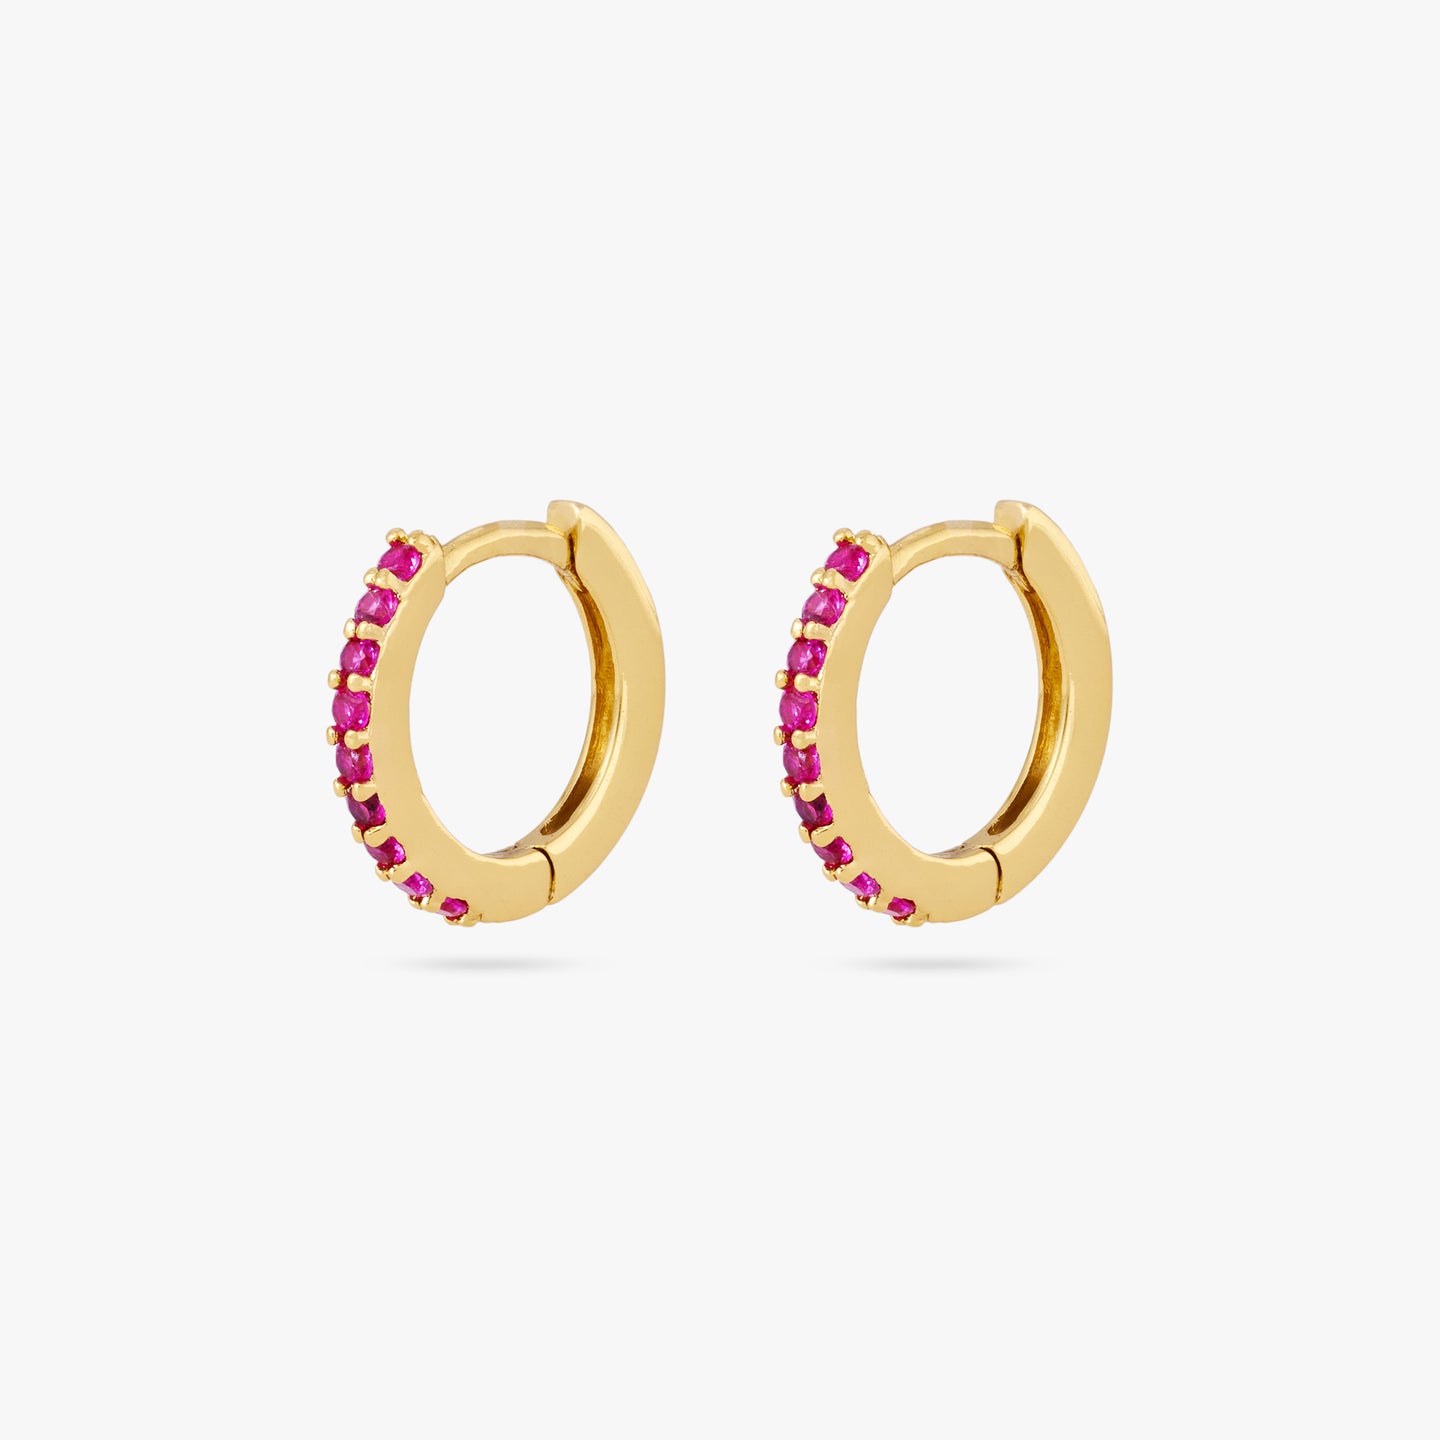 A pair of mini gold huggies lined with pink cz gems on the front [pair] color:null|gold/pink